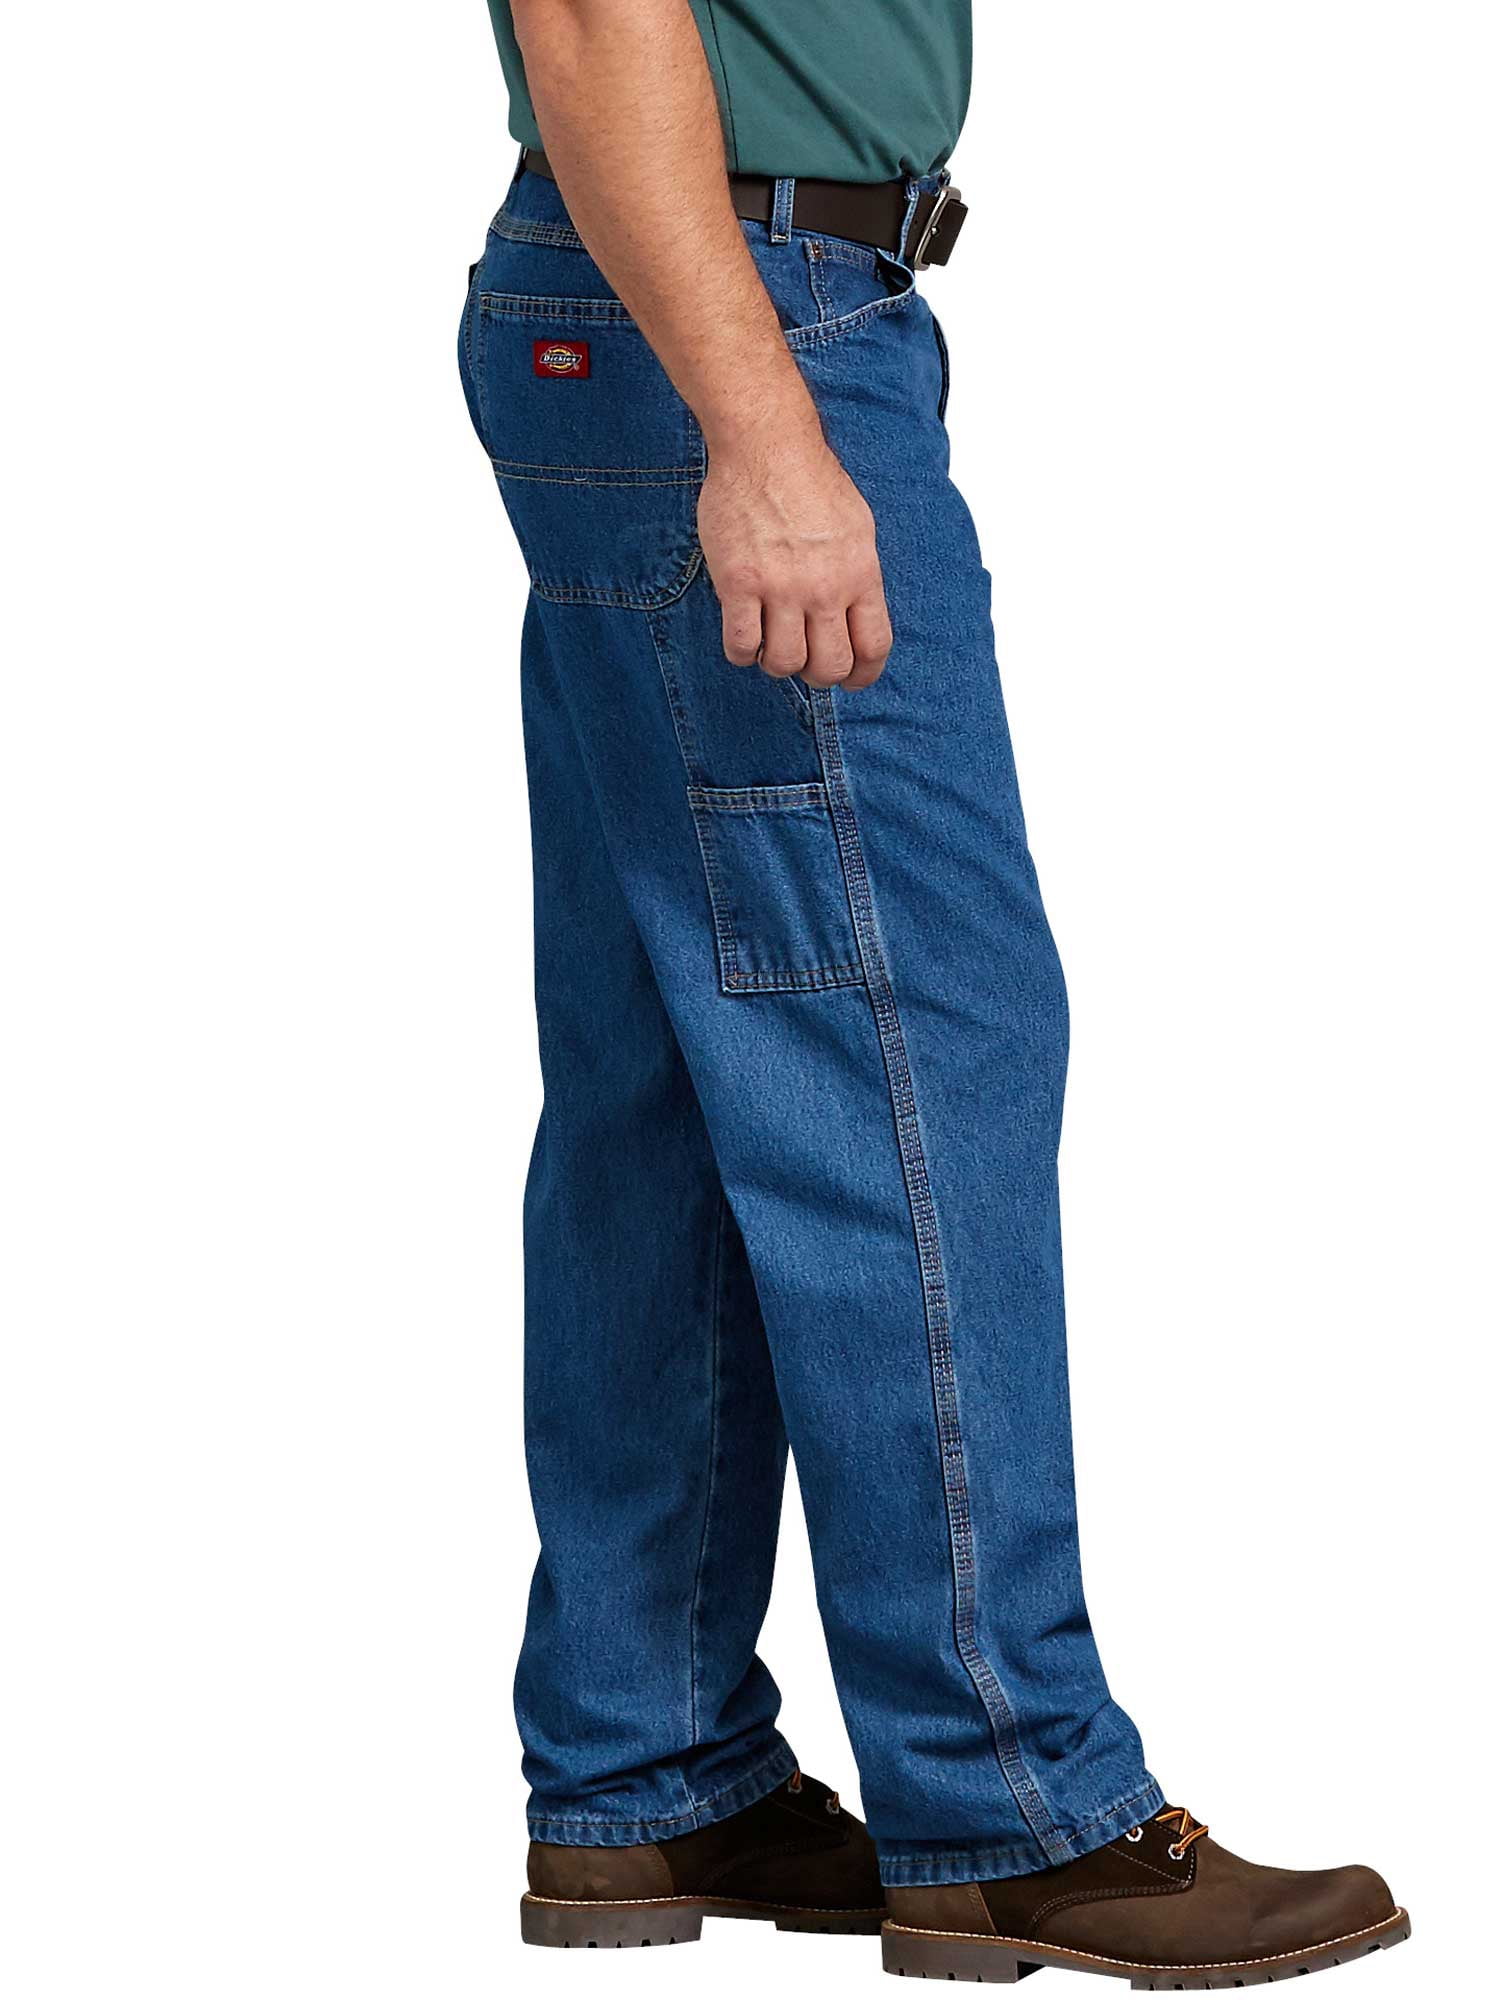 Dickies: Relaxed Fit Carpenter Jeans, Stone Washed Indigo